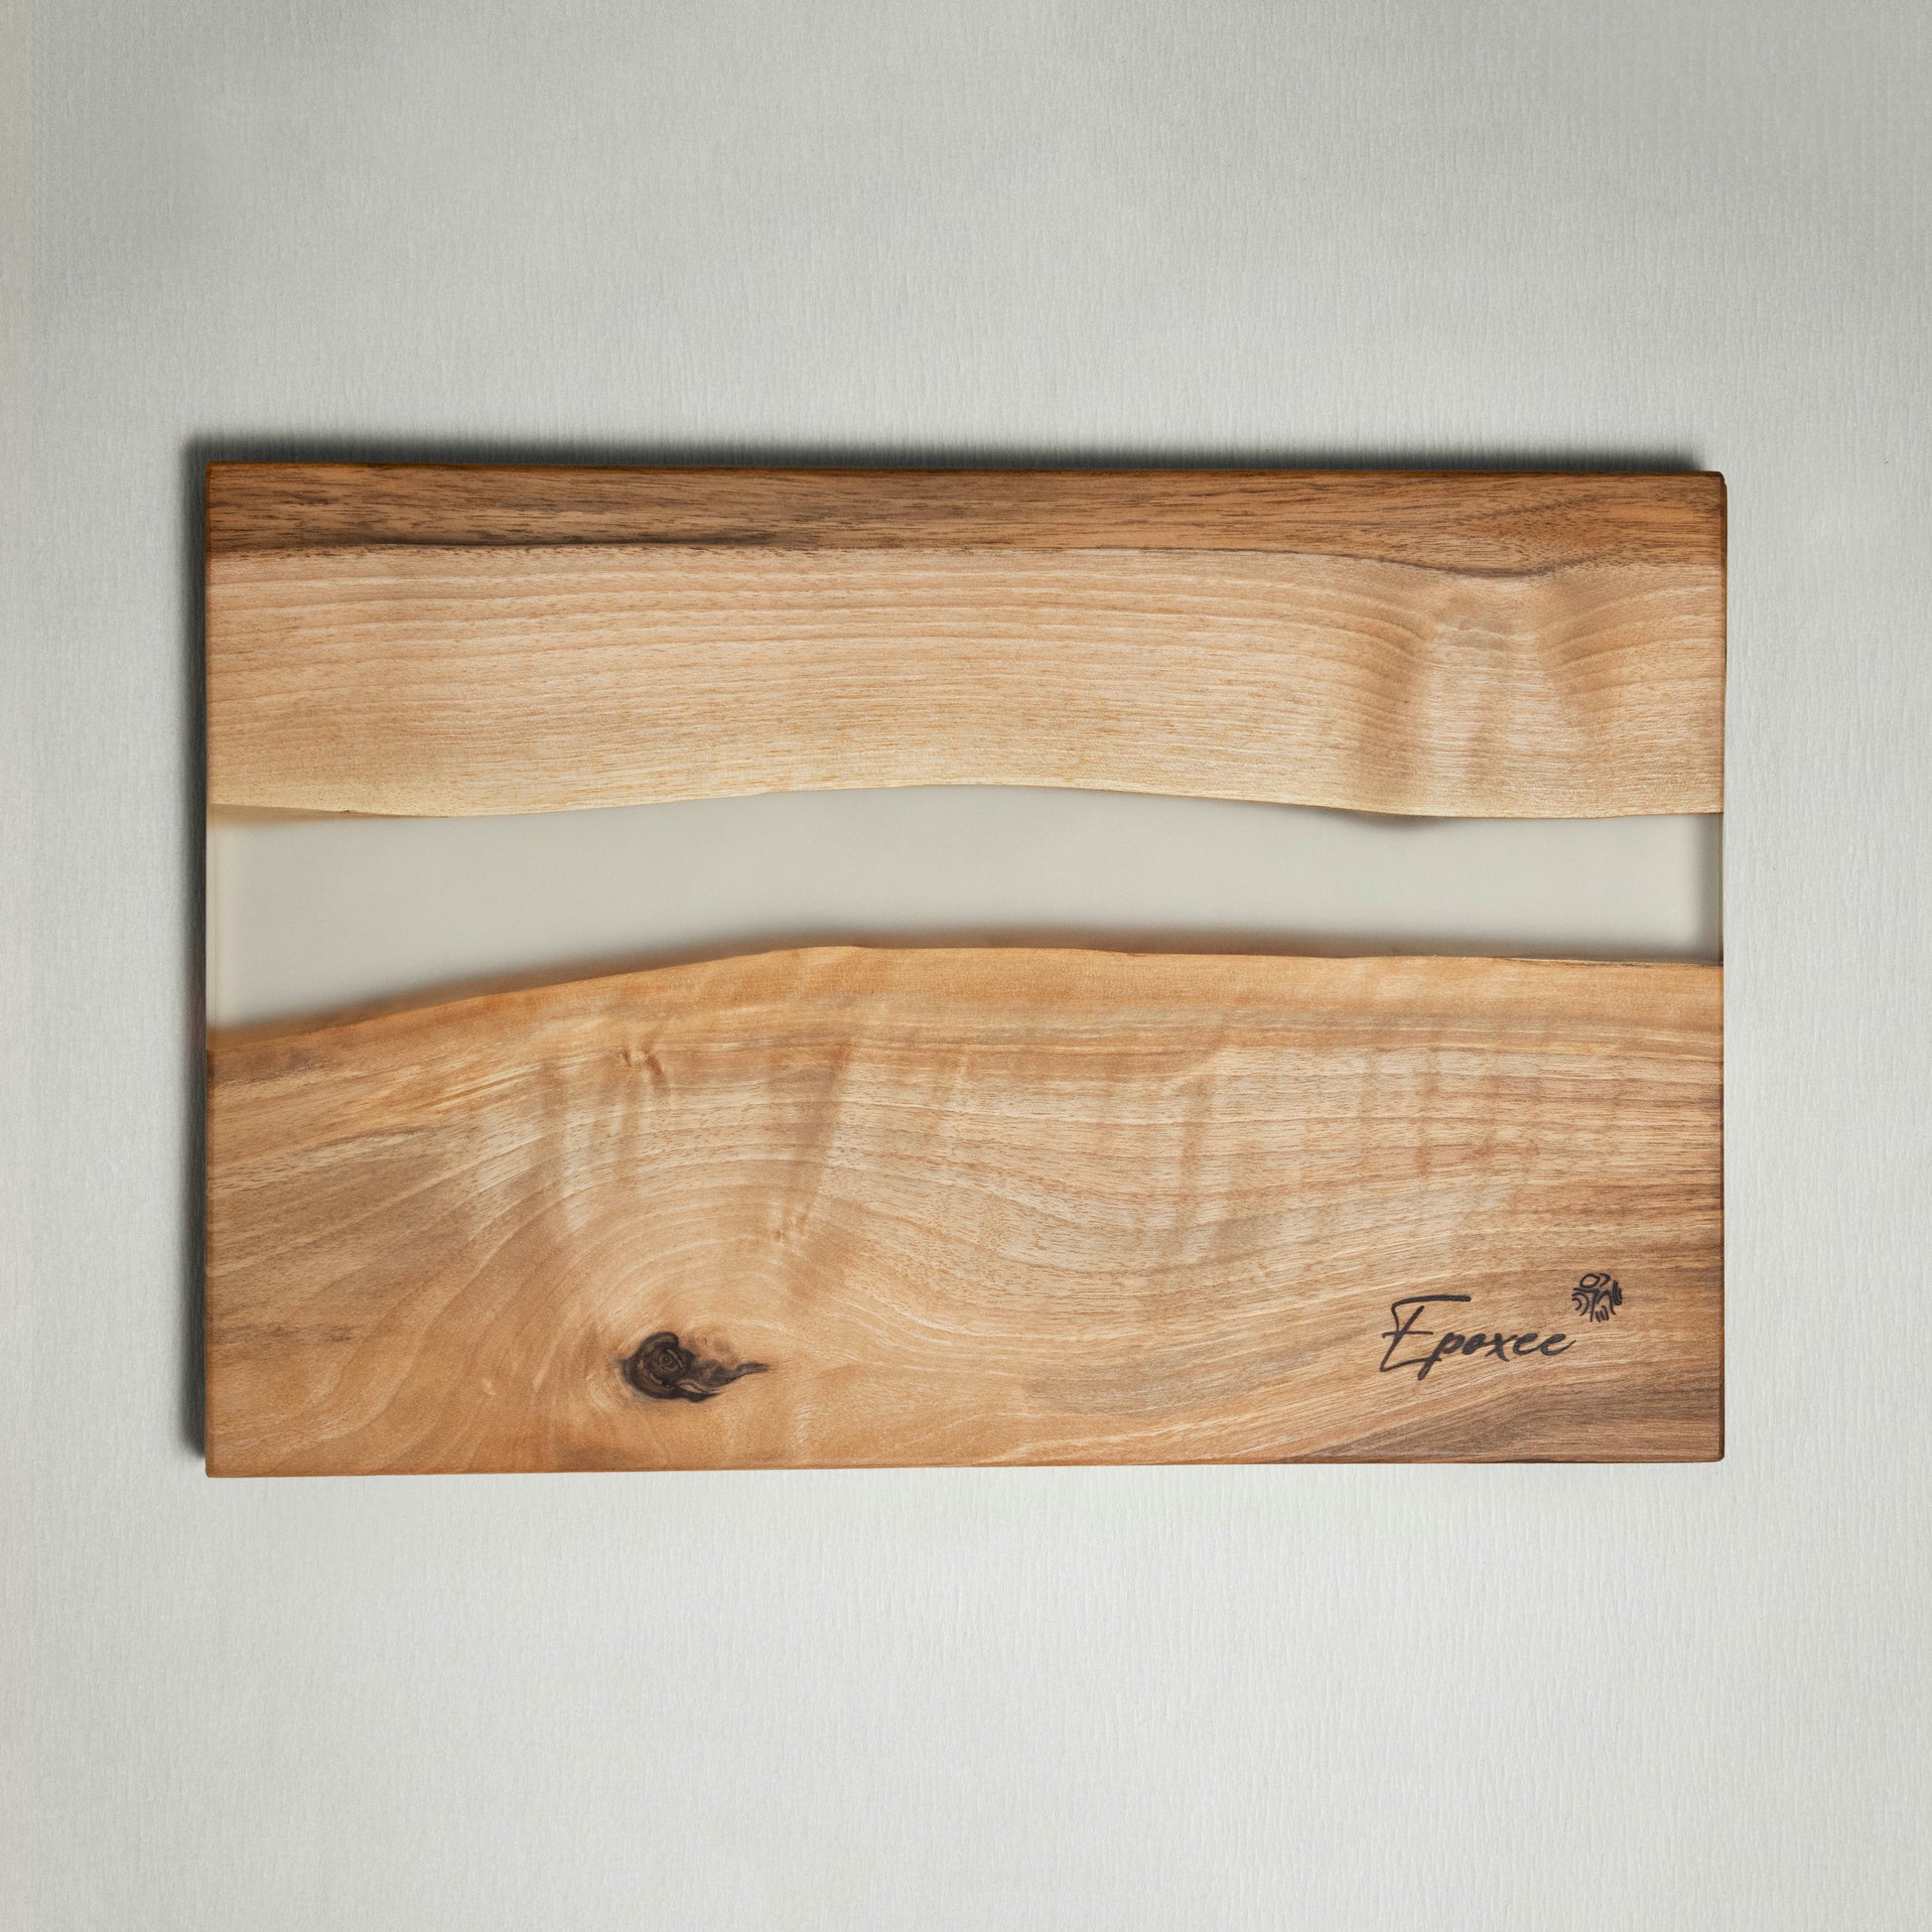 Serving board made from wood and epoxy resin in the color smoky crystal